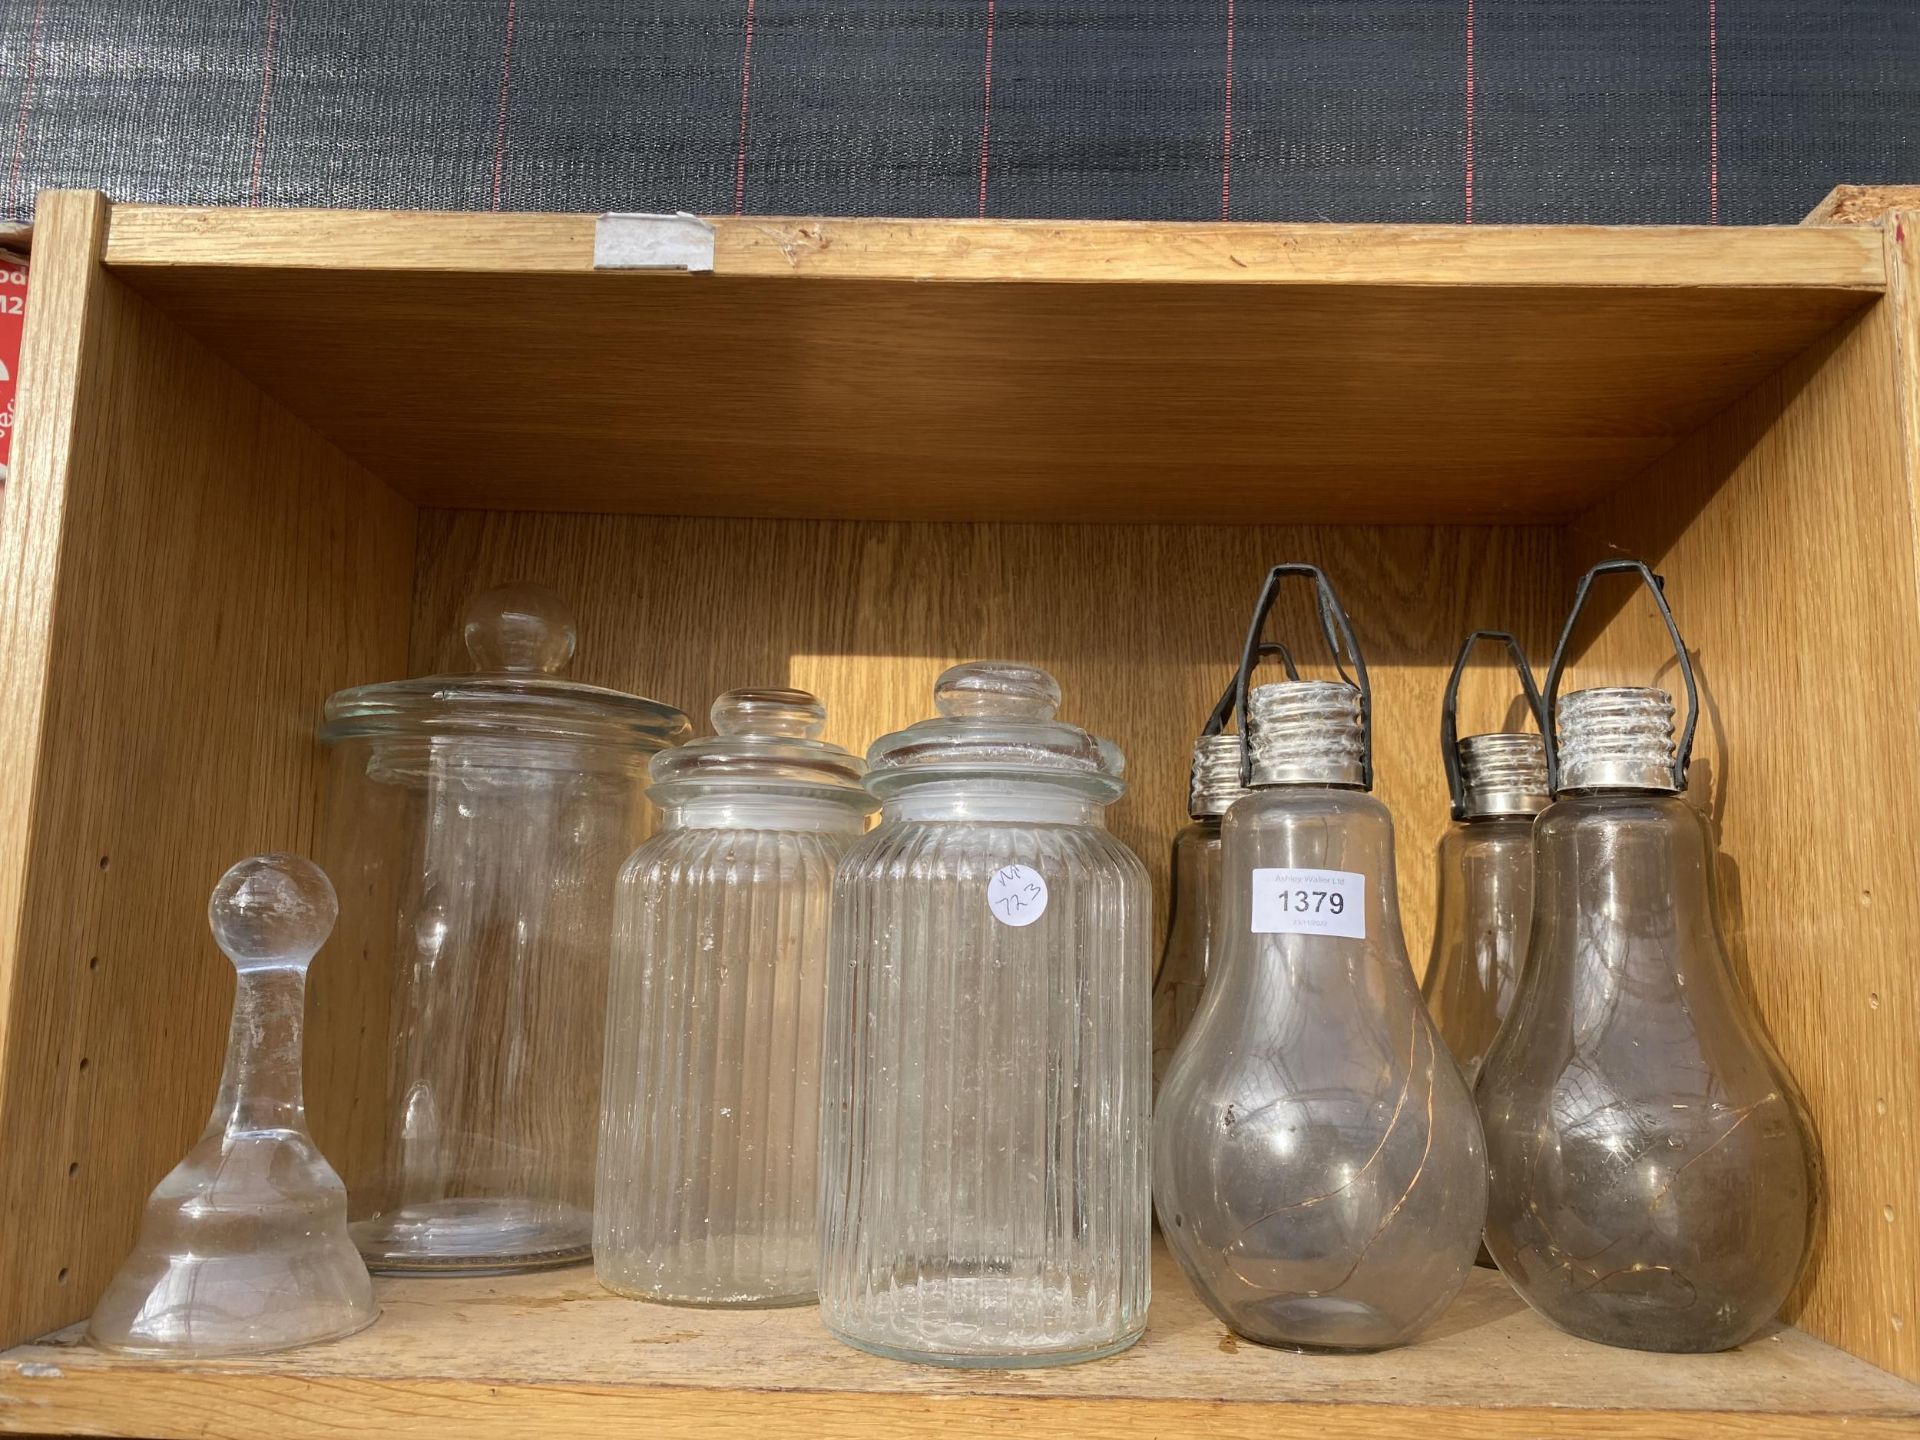 AN ASSORTMENT OF GLASS STORAGE JARS AND GLASS LIGHTS IN THE FORM OF A LIGHT BULB ETC